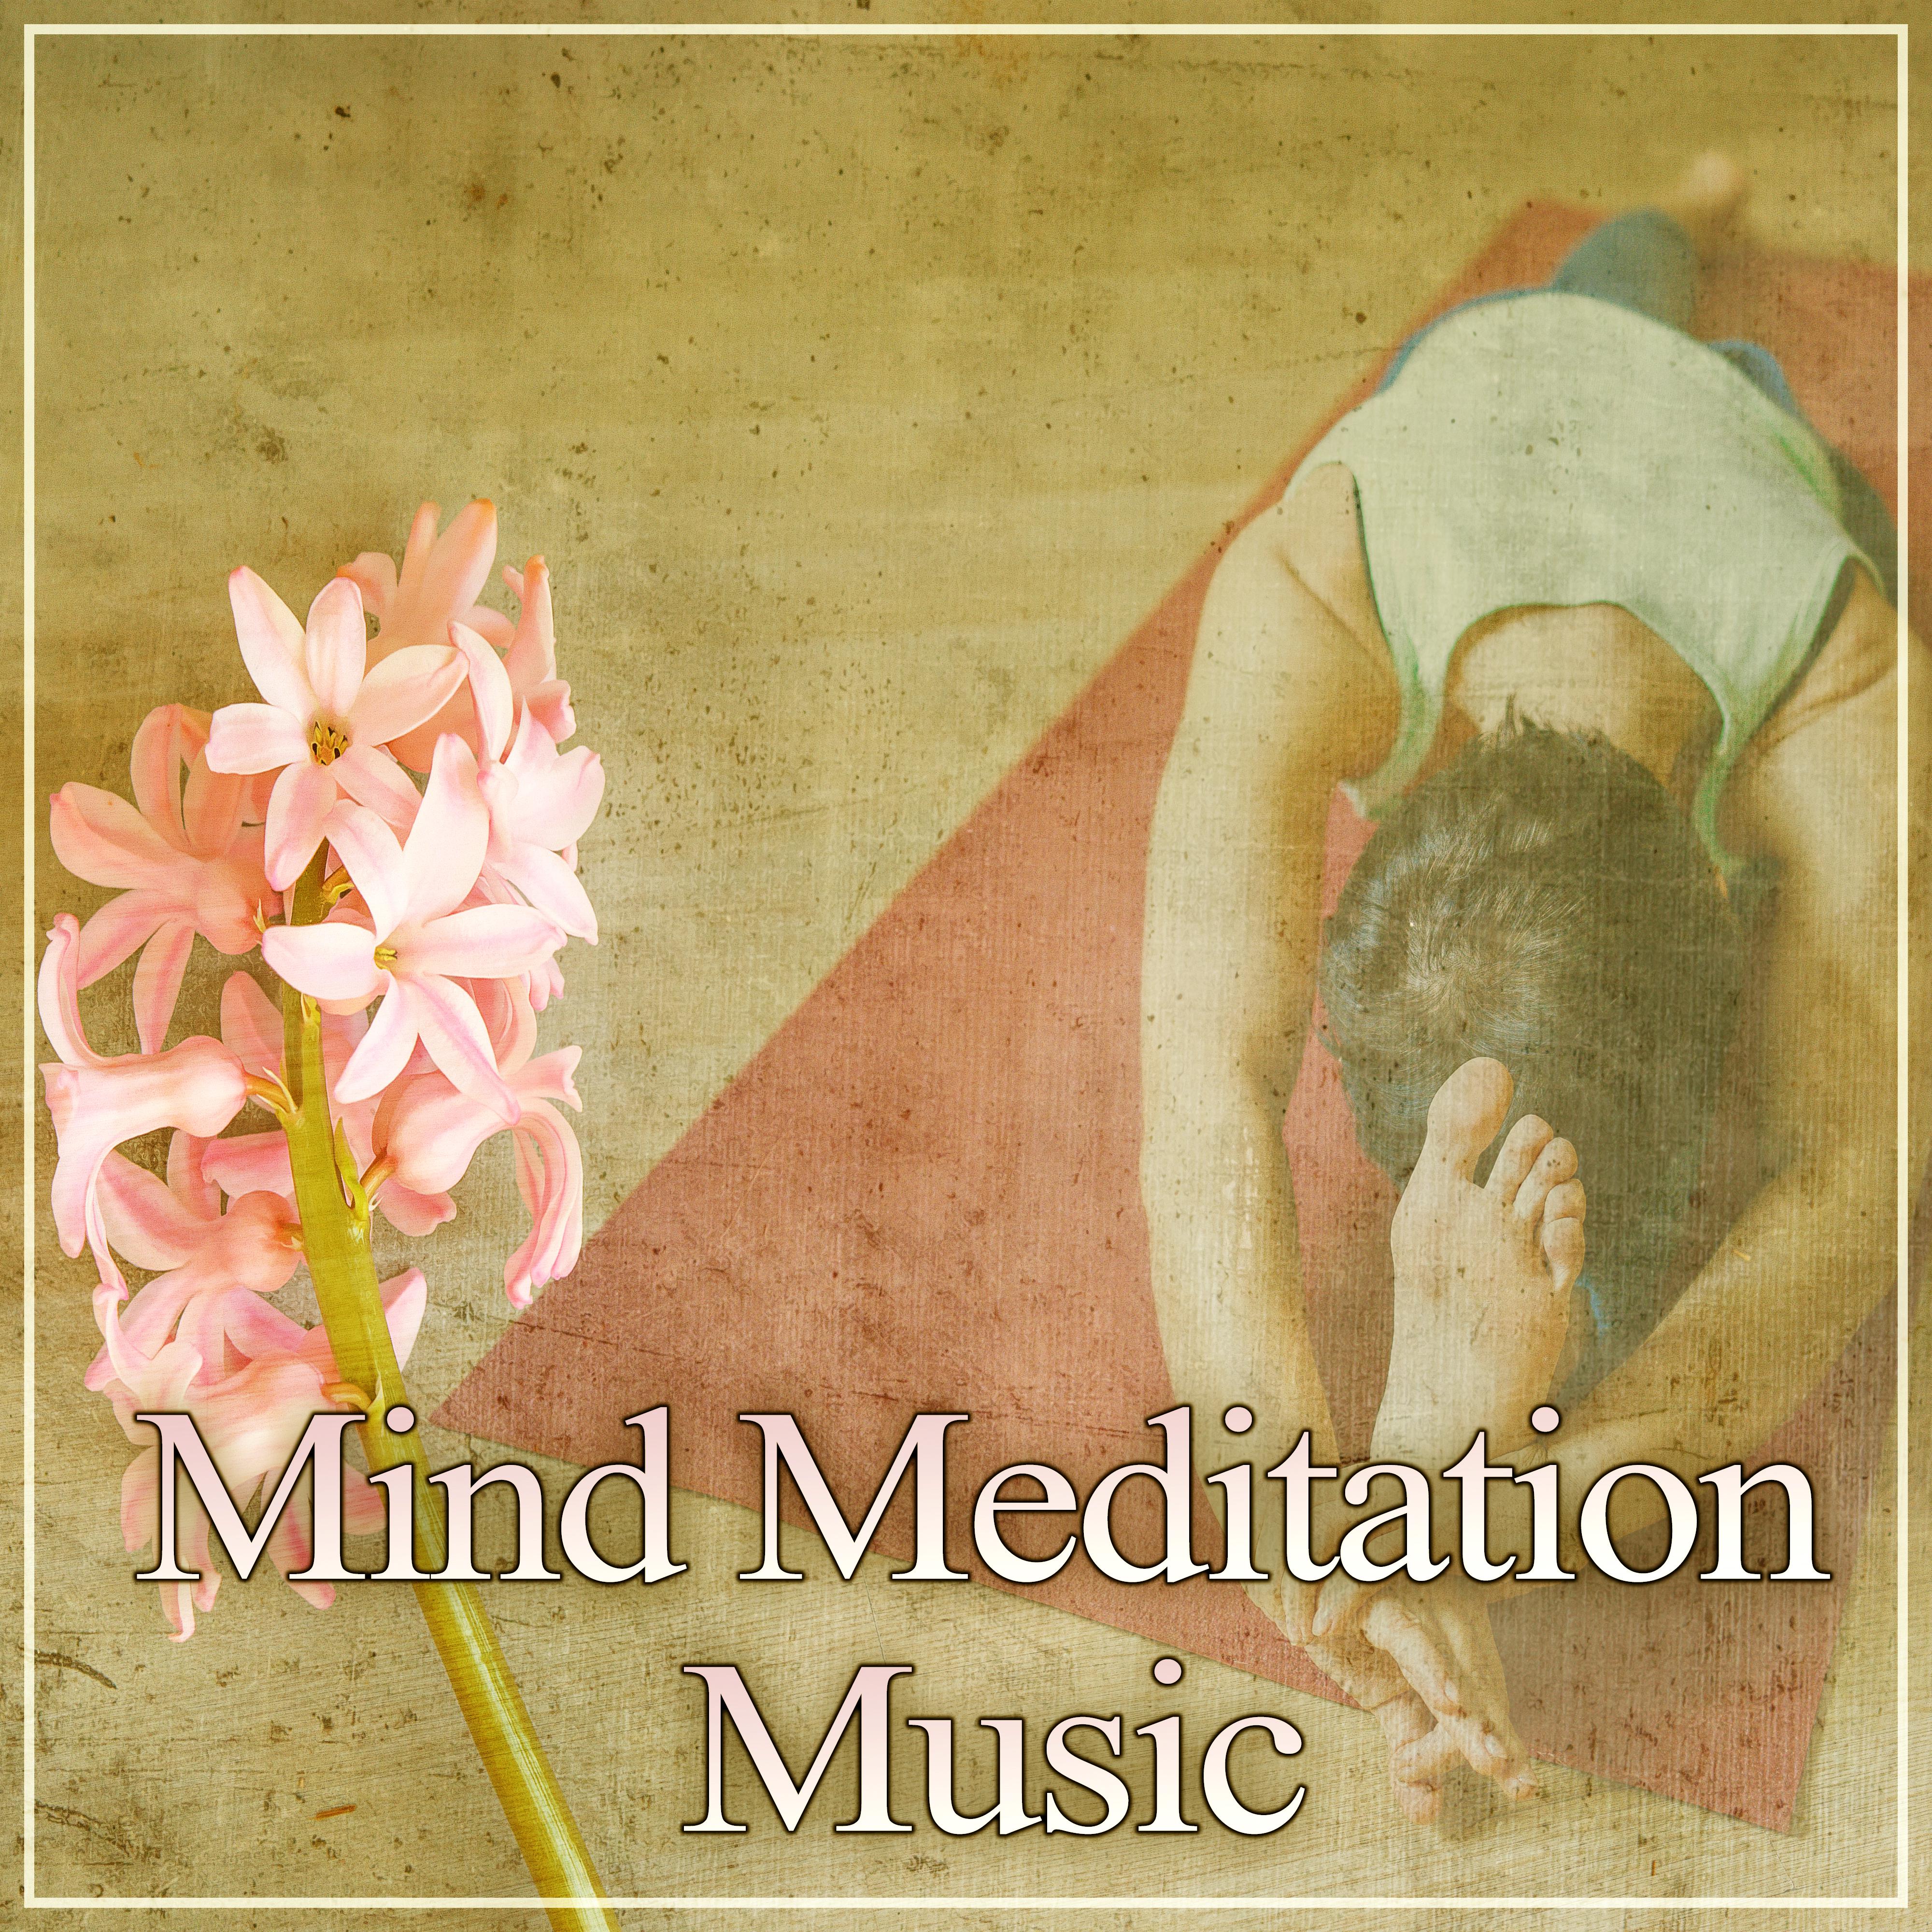 Mind Meditation Music – New Age Music for Relaxation, Feel Pure Mind with Healing Music, Calmness, Mindfulness Meditation